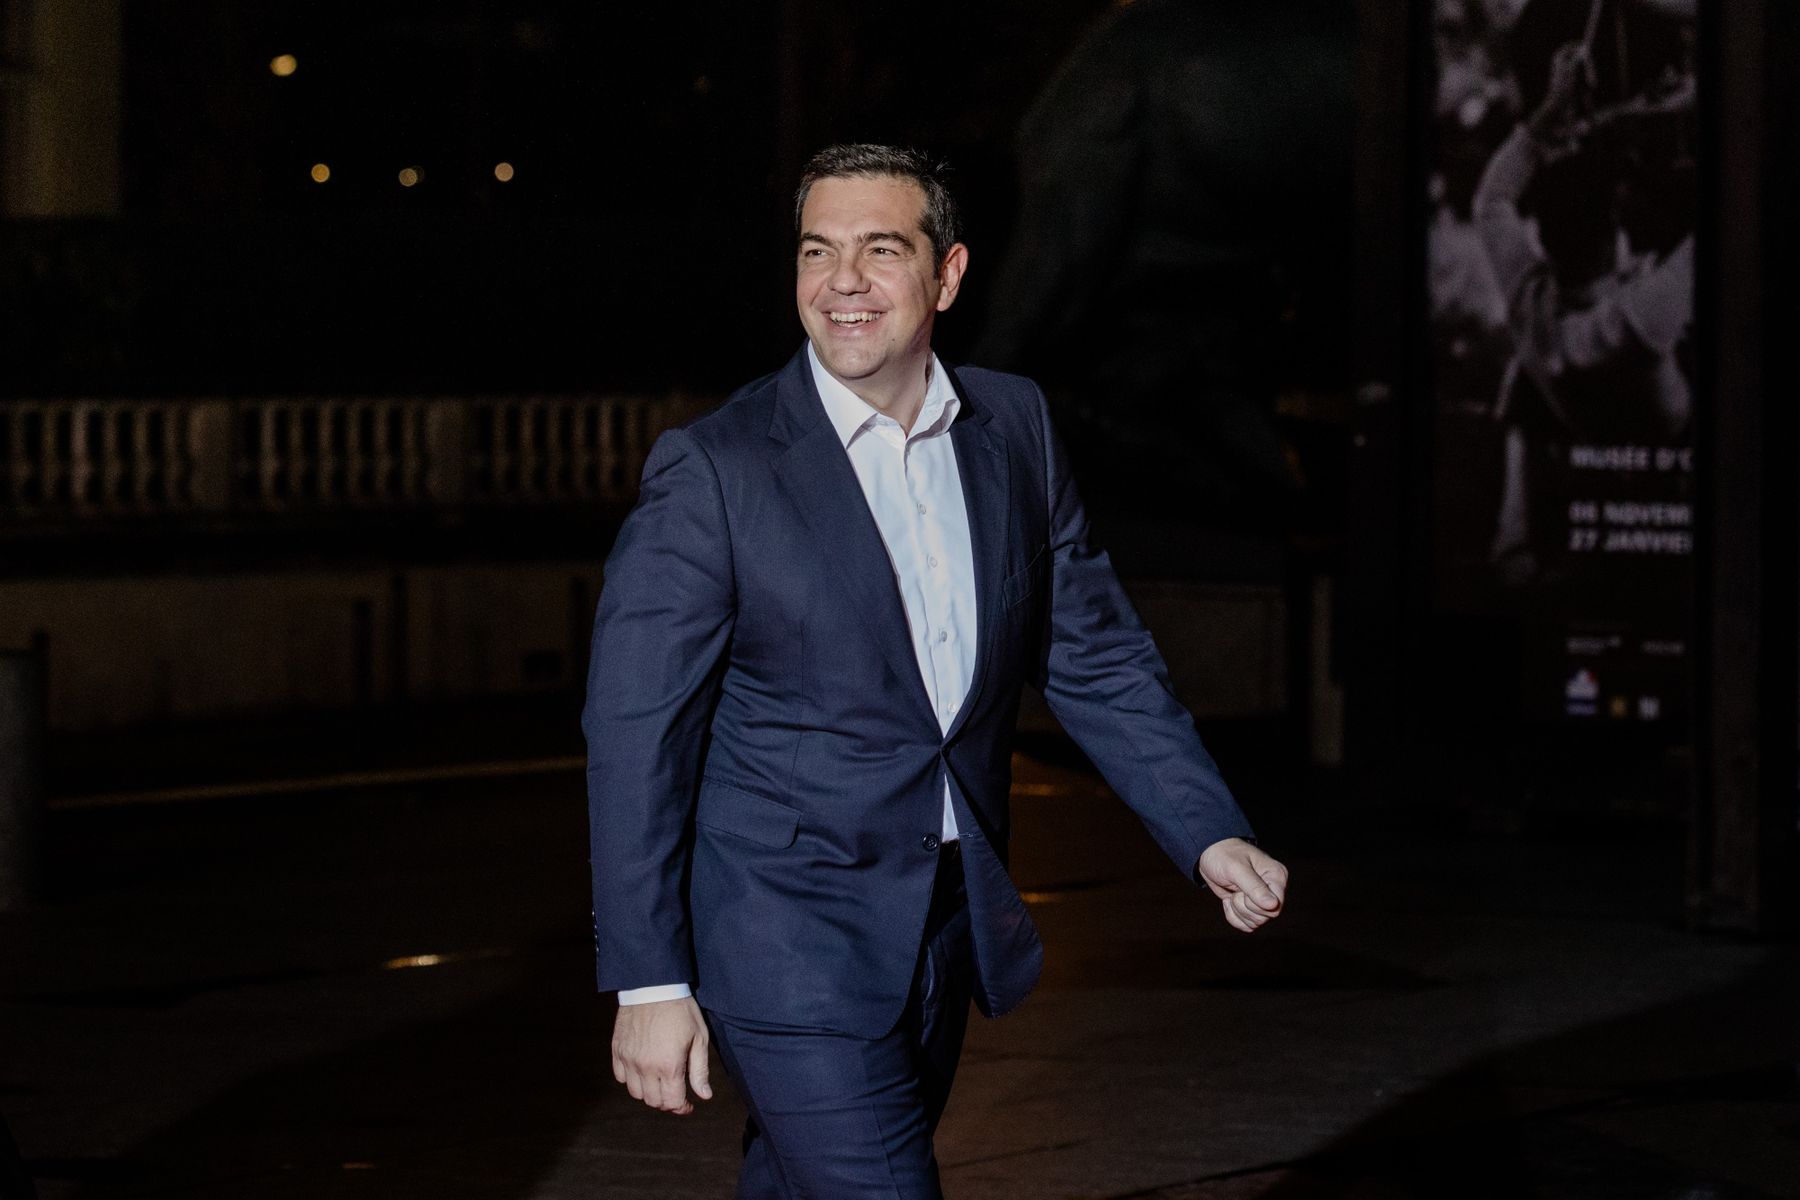 Greece Reduces Surplus Targets, Challenging Deal With Creditors